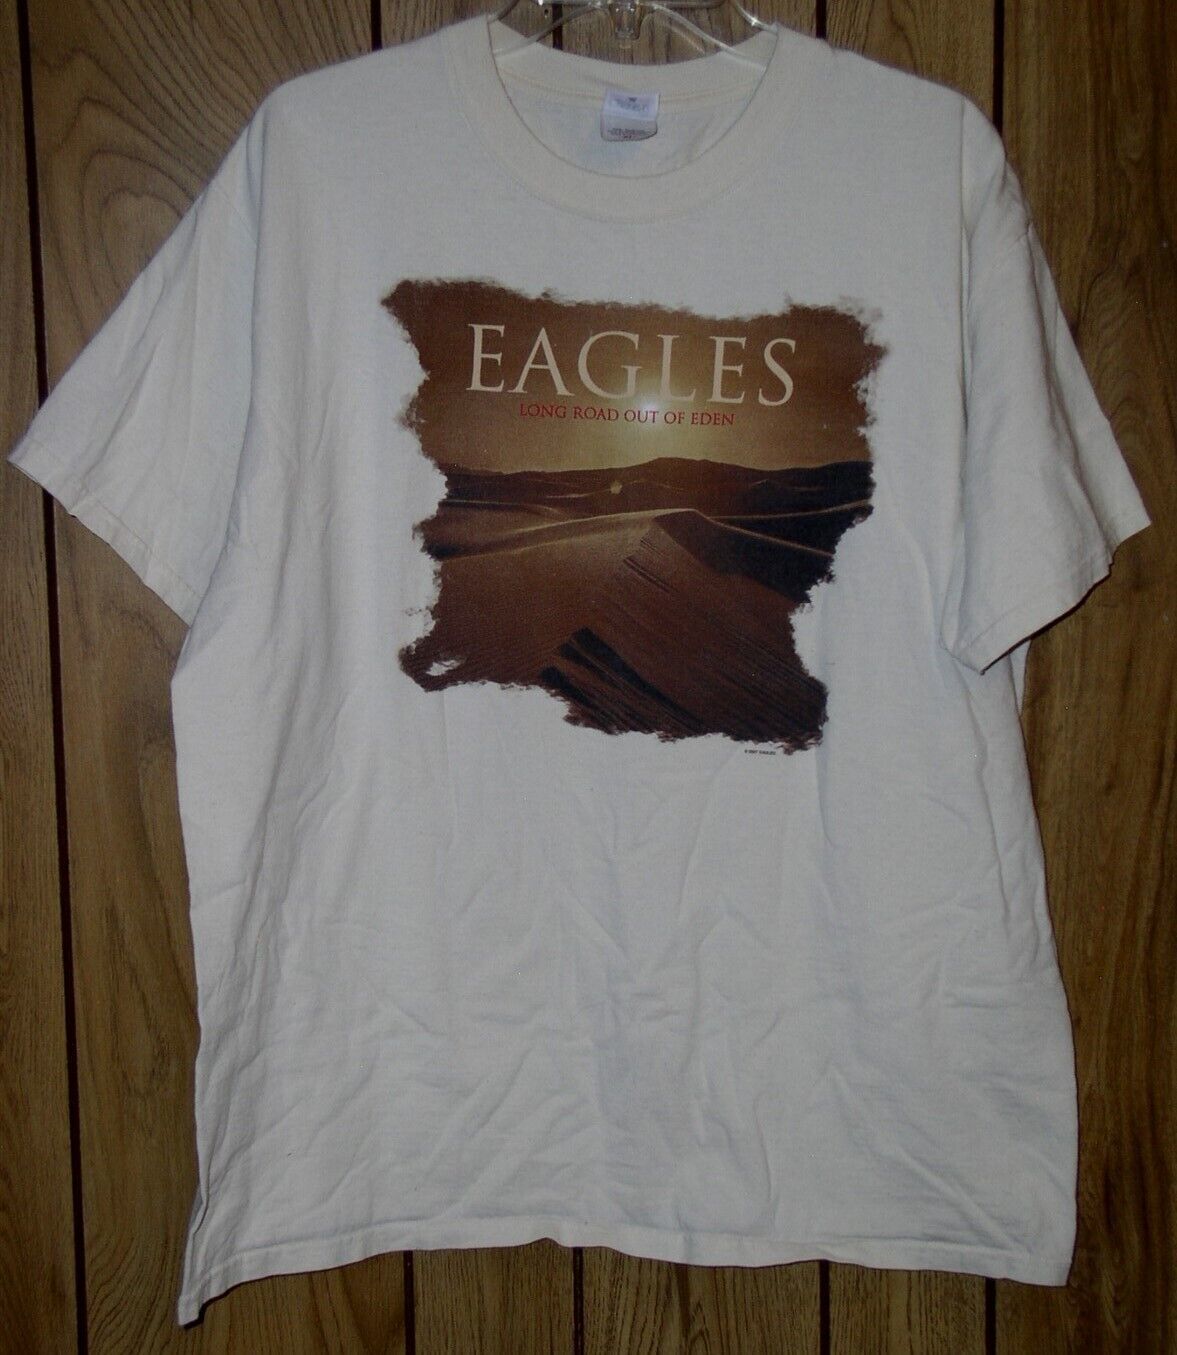 Primary image for The Eagles Concert Tour T Shirt Vintage 2007 Long Road Out Of Eden Size X-Large